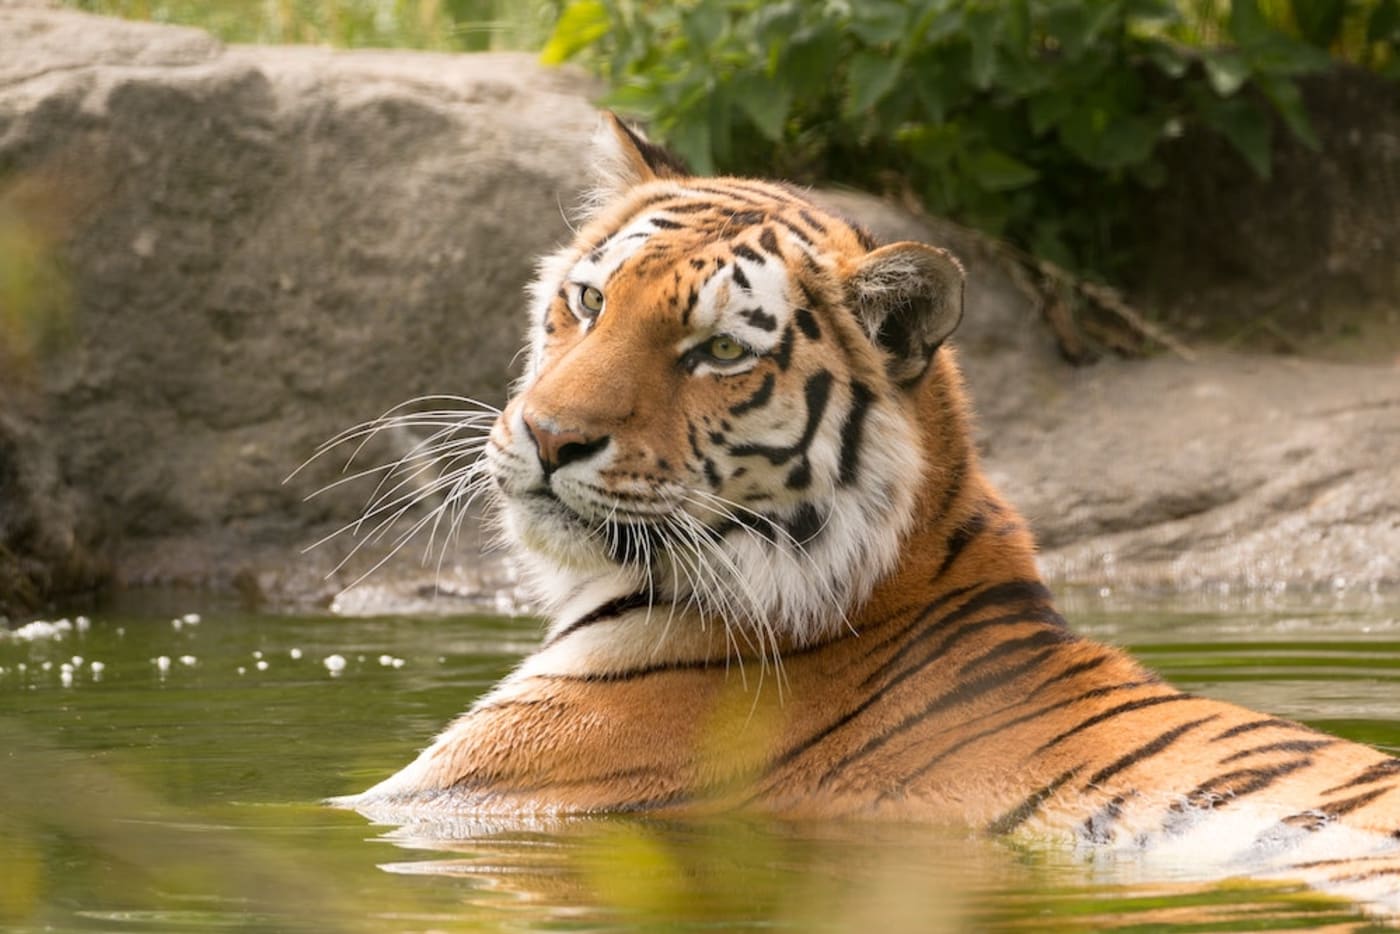 Tiger on water